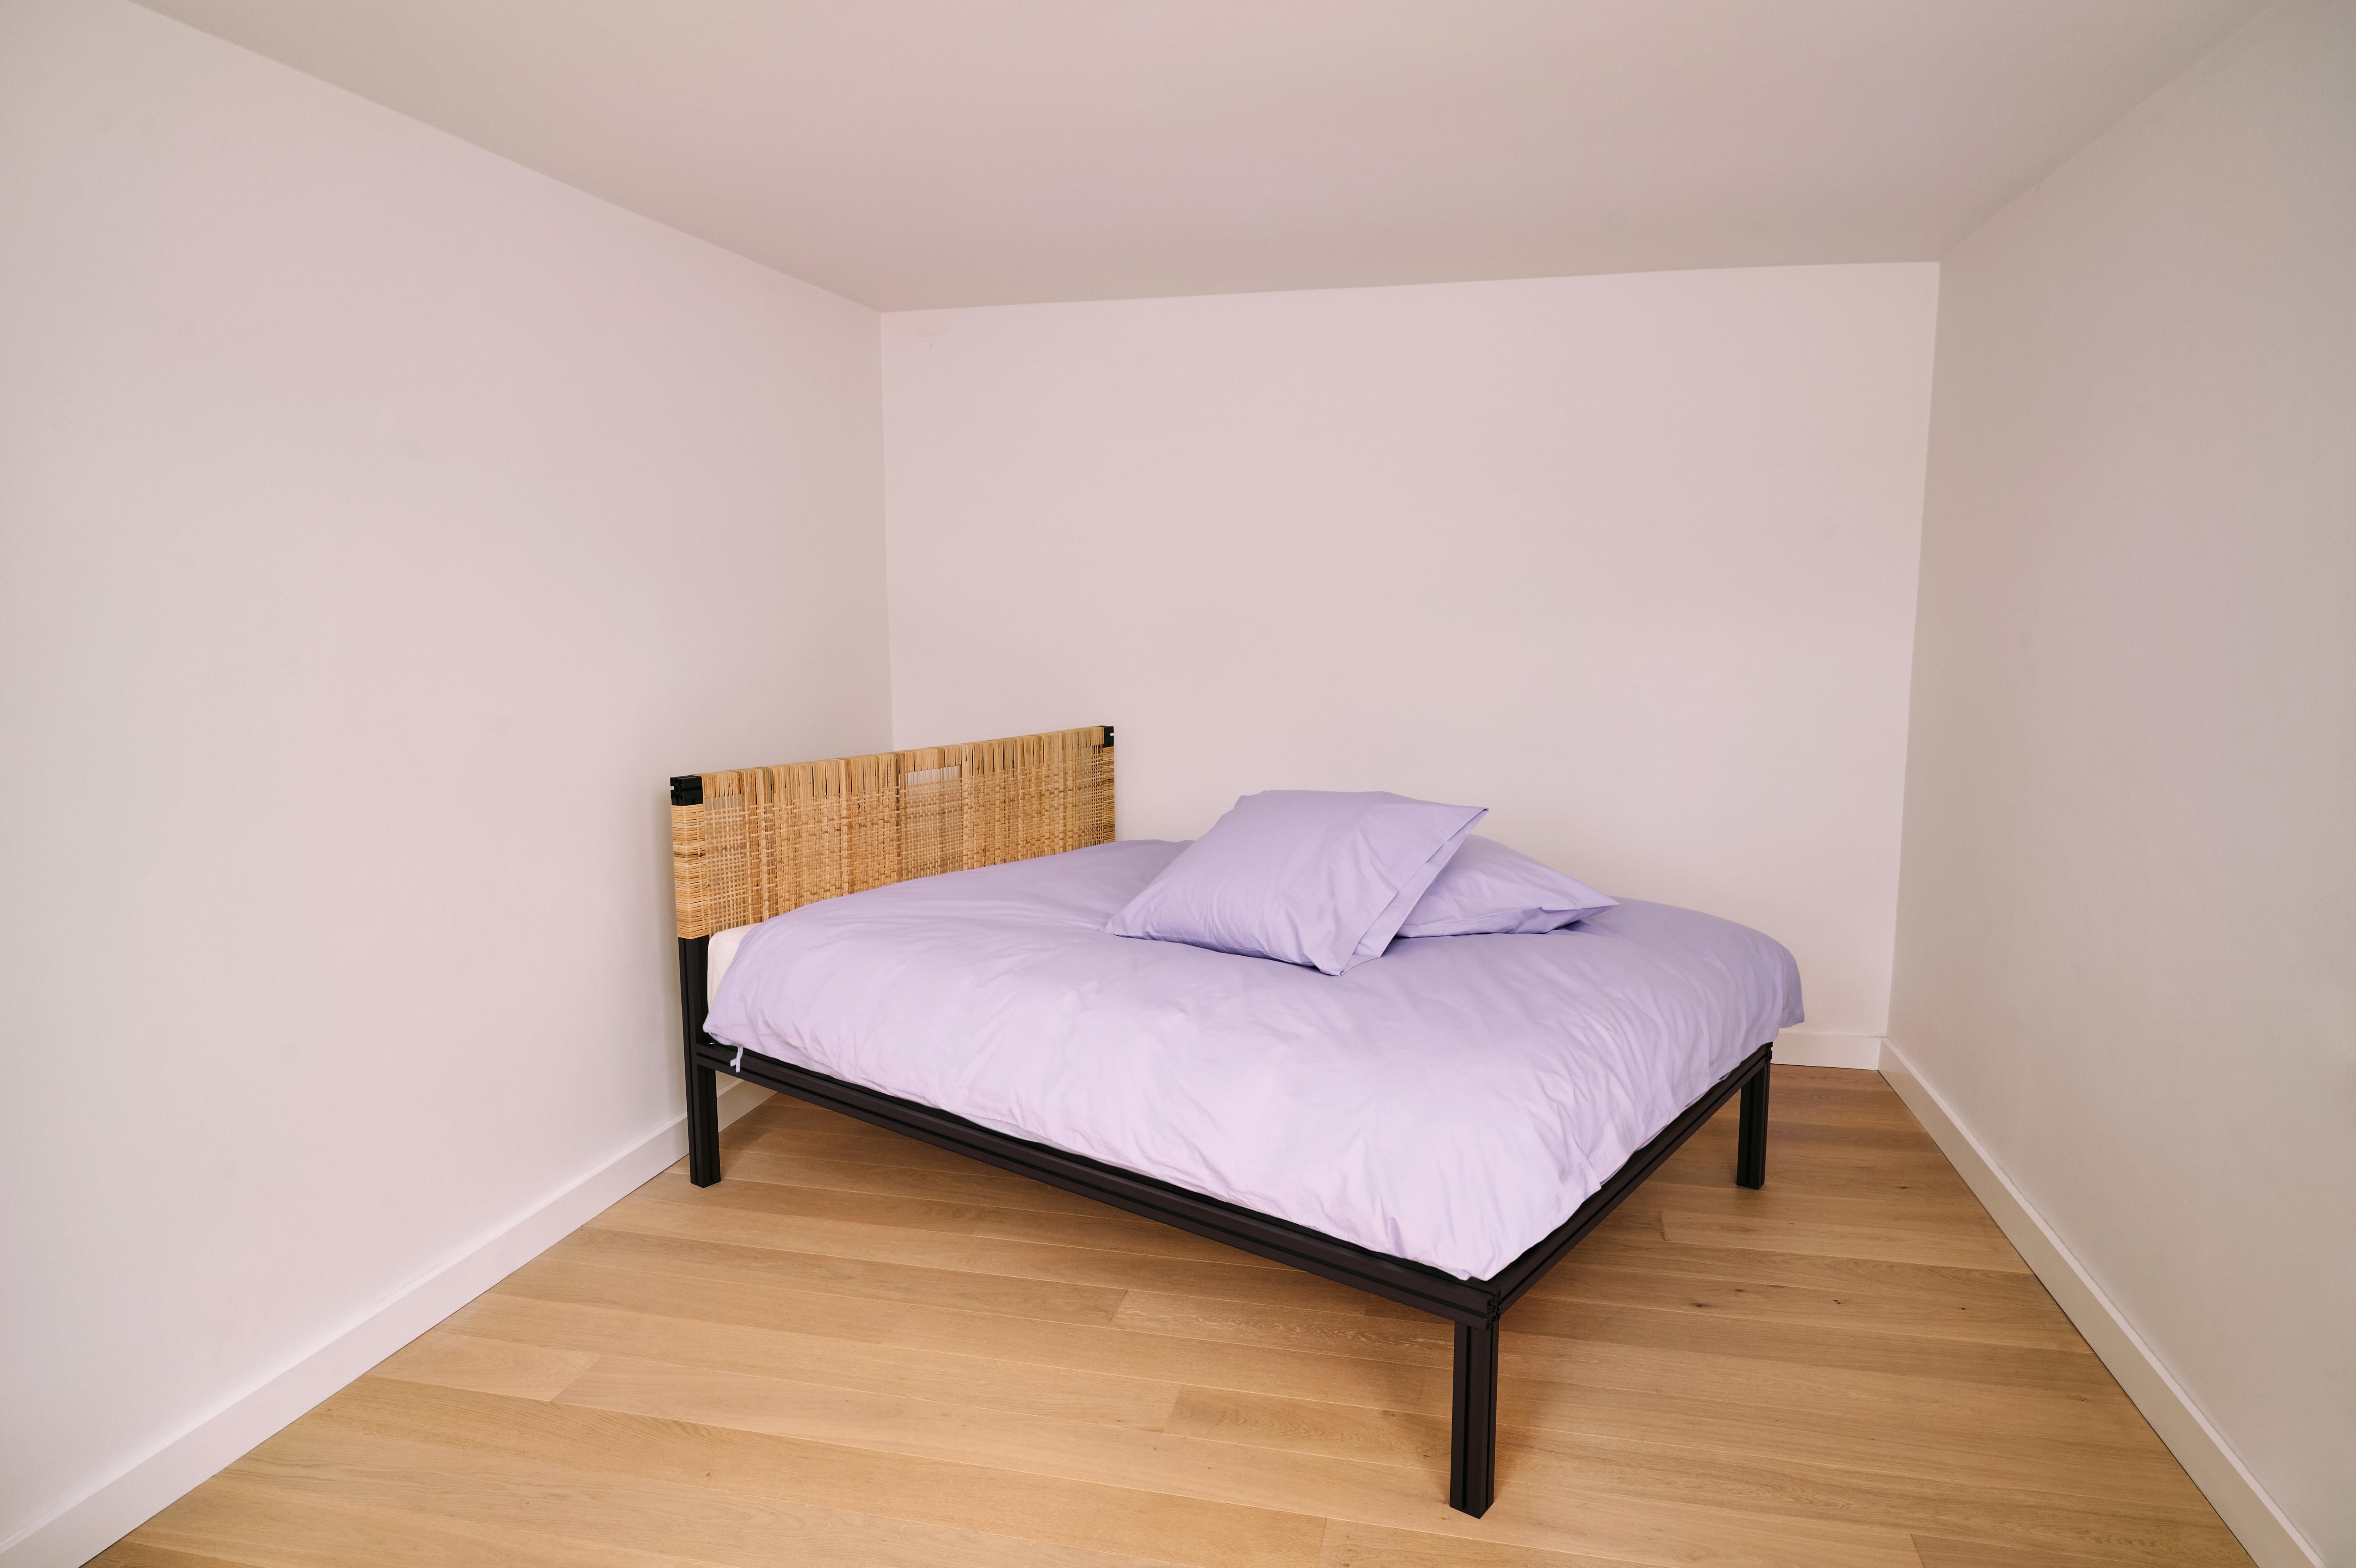 Bed frame made from dark brown anodised aluminium extrusions and a woven cane head board. The shown bed is UK king size with the mattress being 35 off the ground, but all other bed sizes are available. The frame comes with slats.

Furniture designer